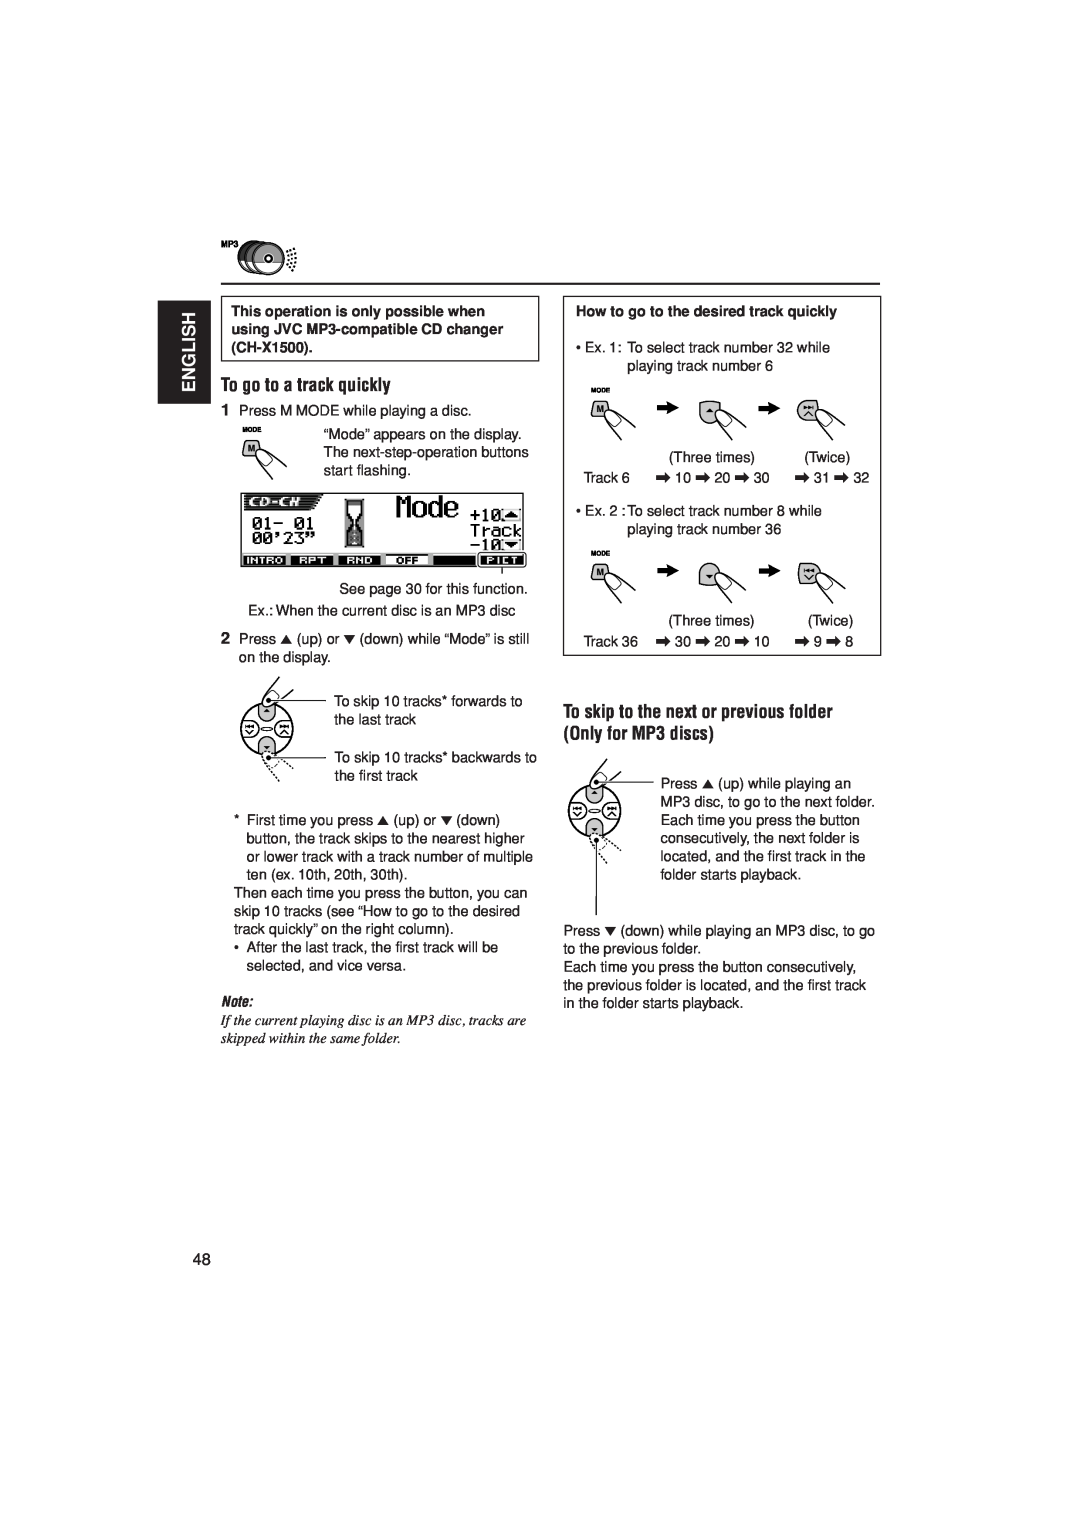 JVC KD-LH305 manual English, To go to a track quickly, How to go to the desired track quickly 